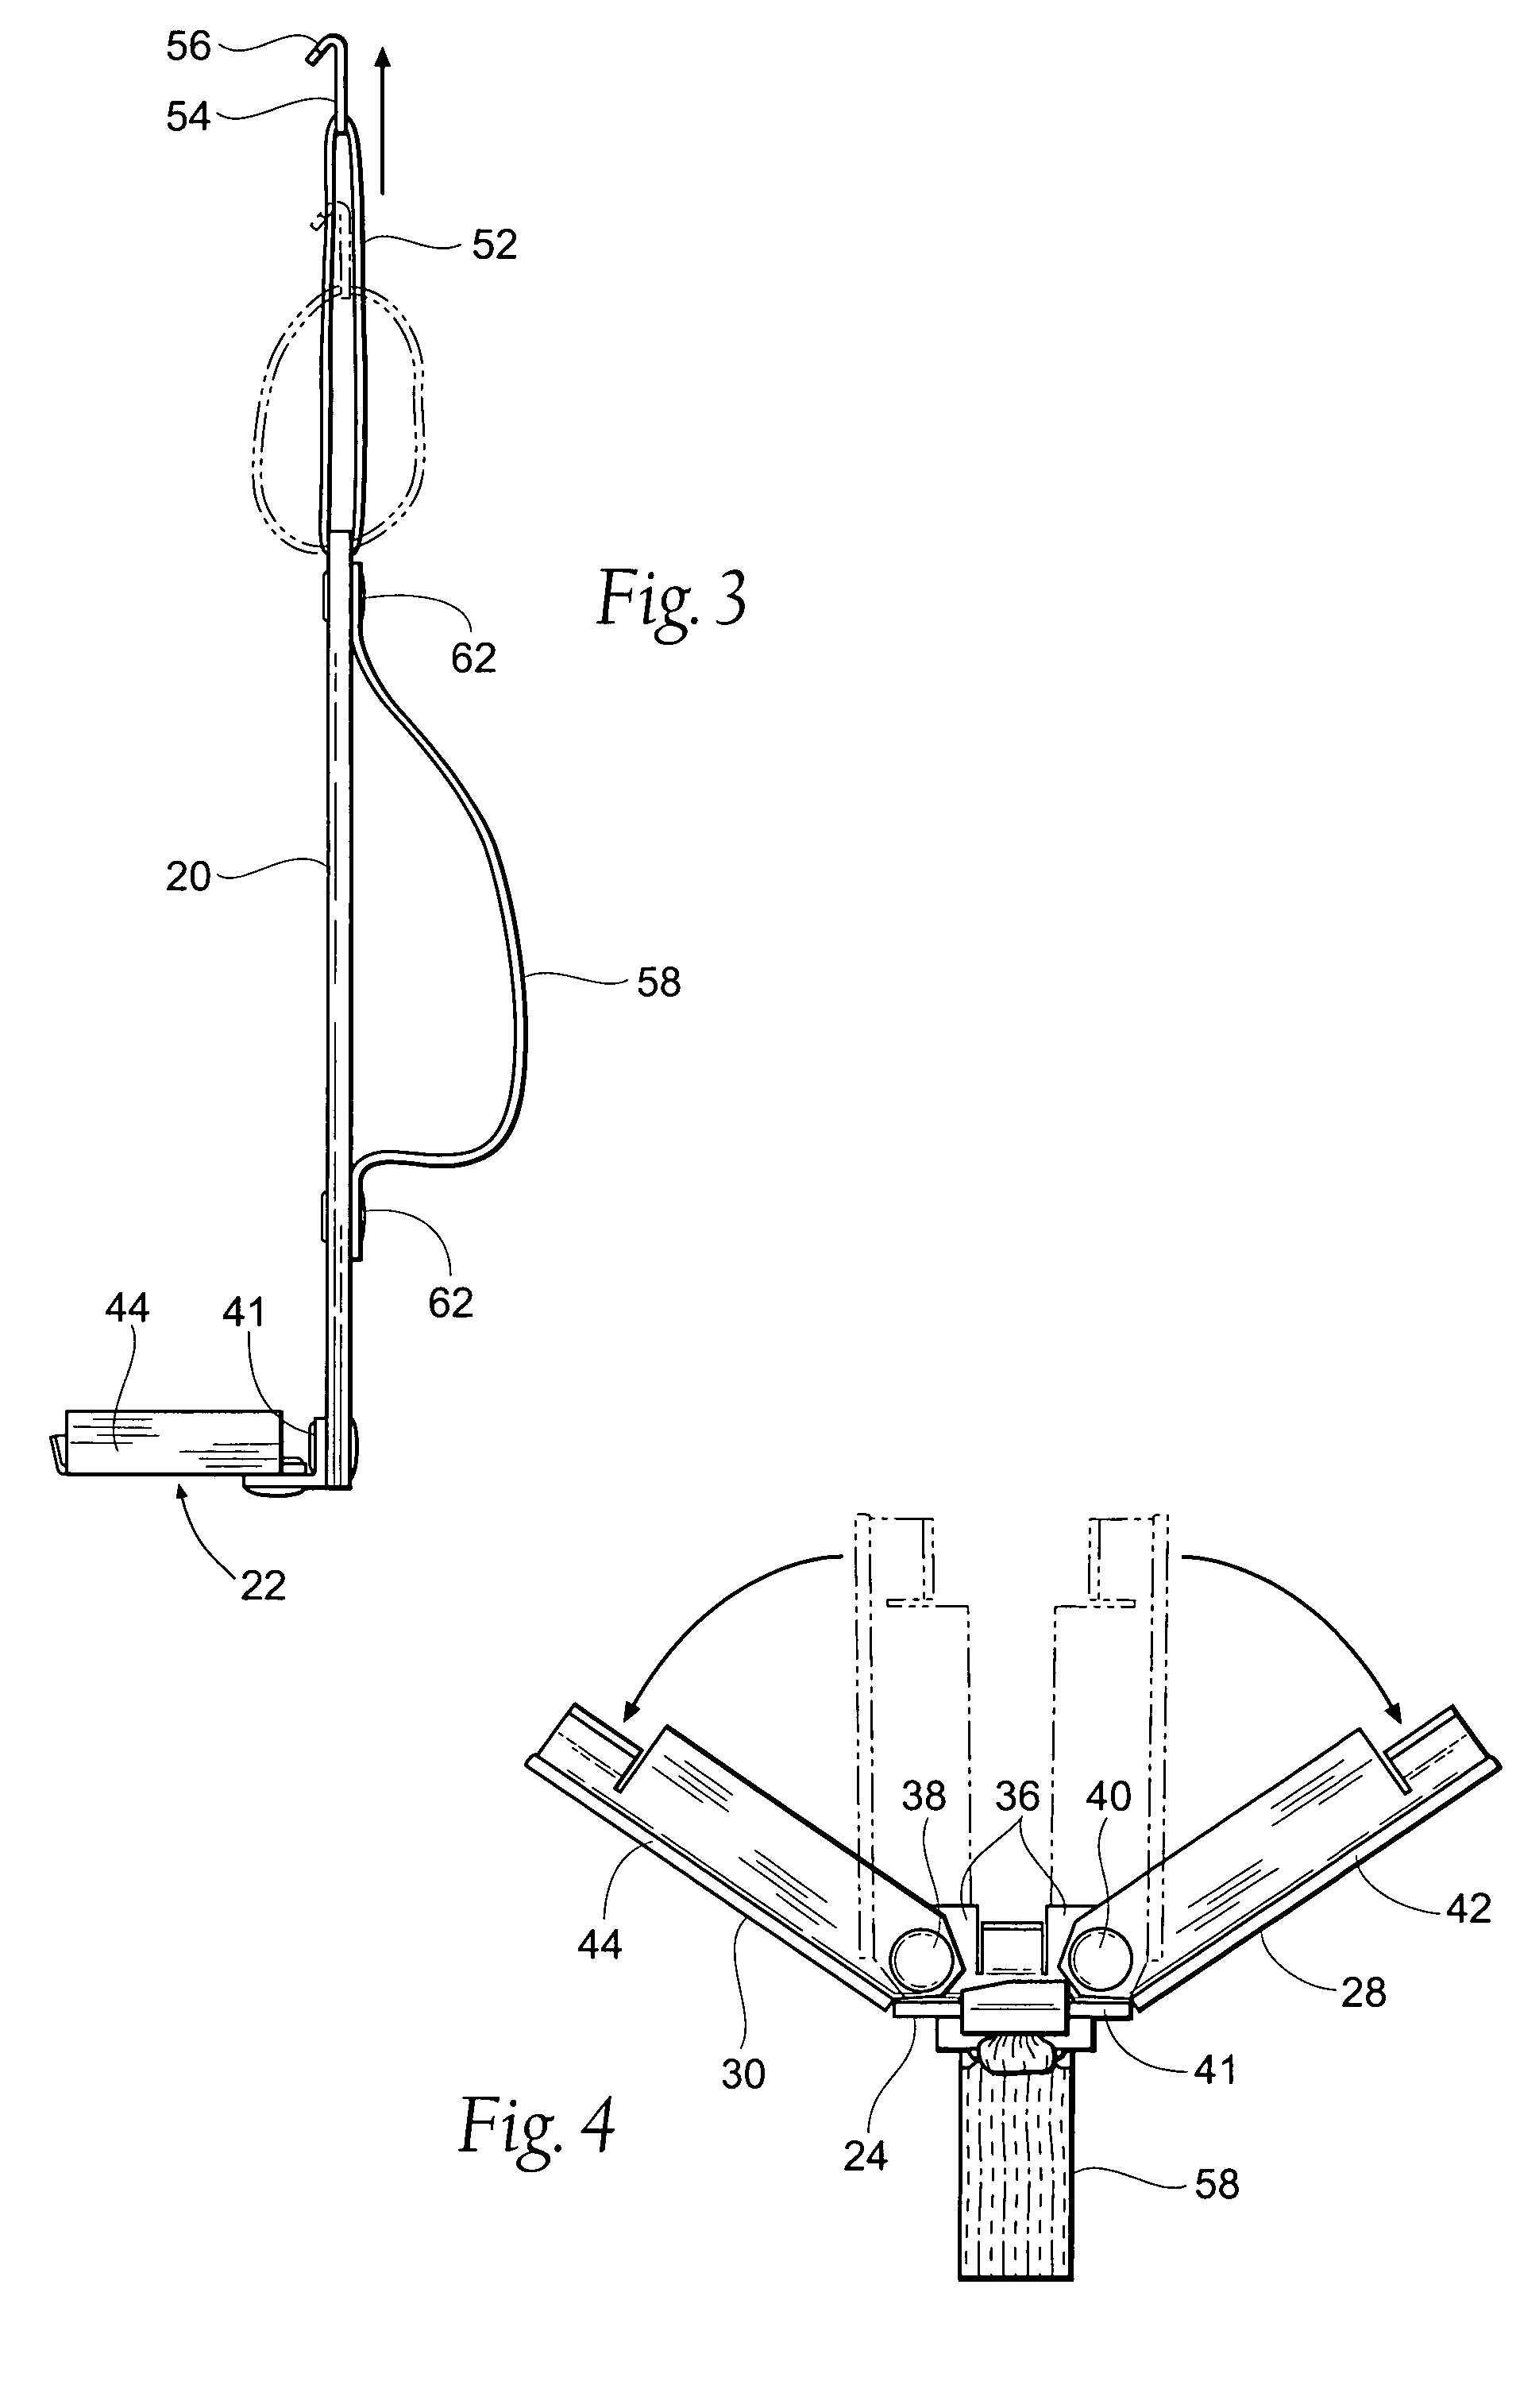 Manual support for folder or binder and contents thereof